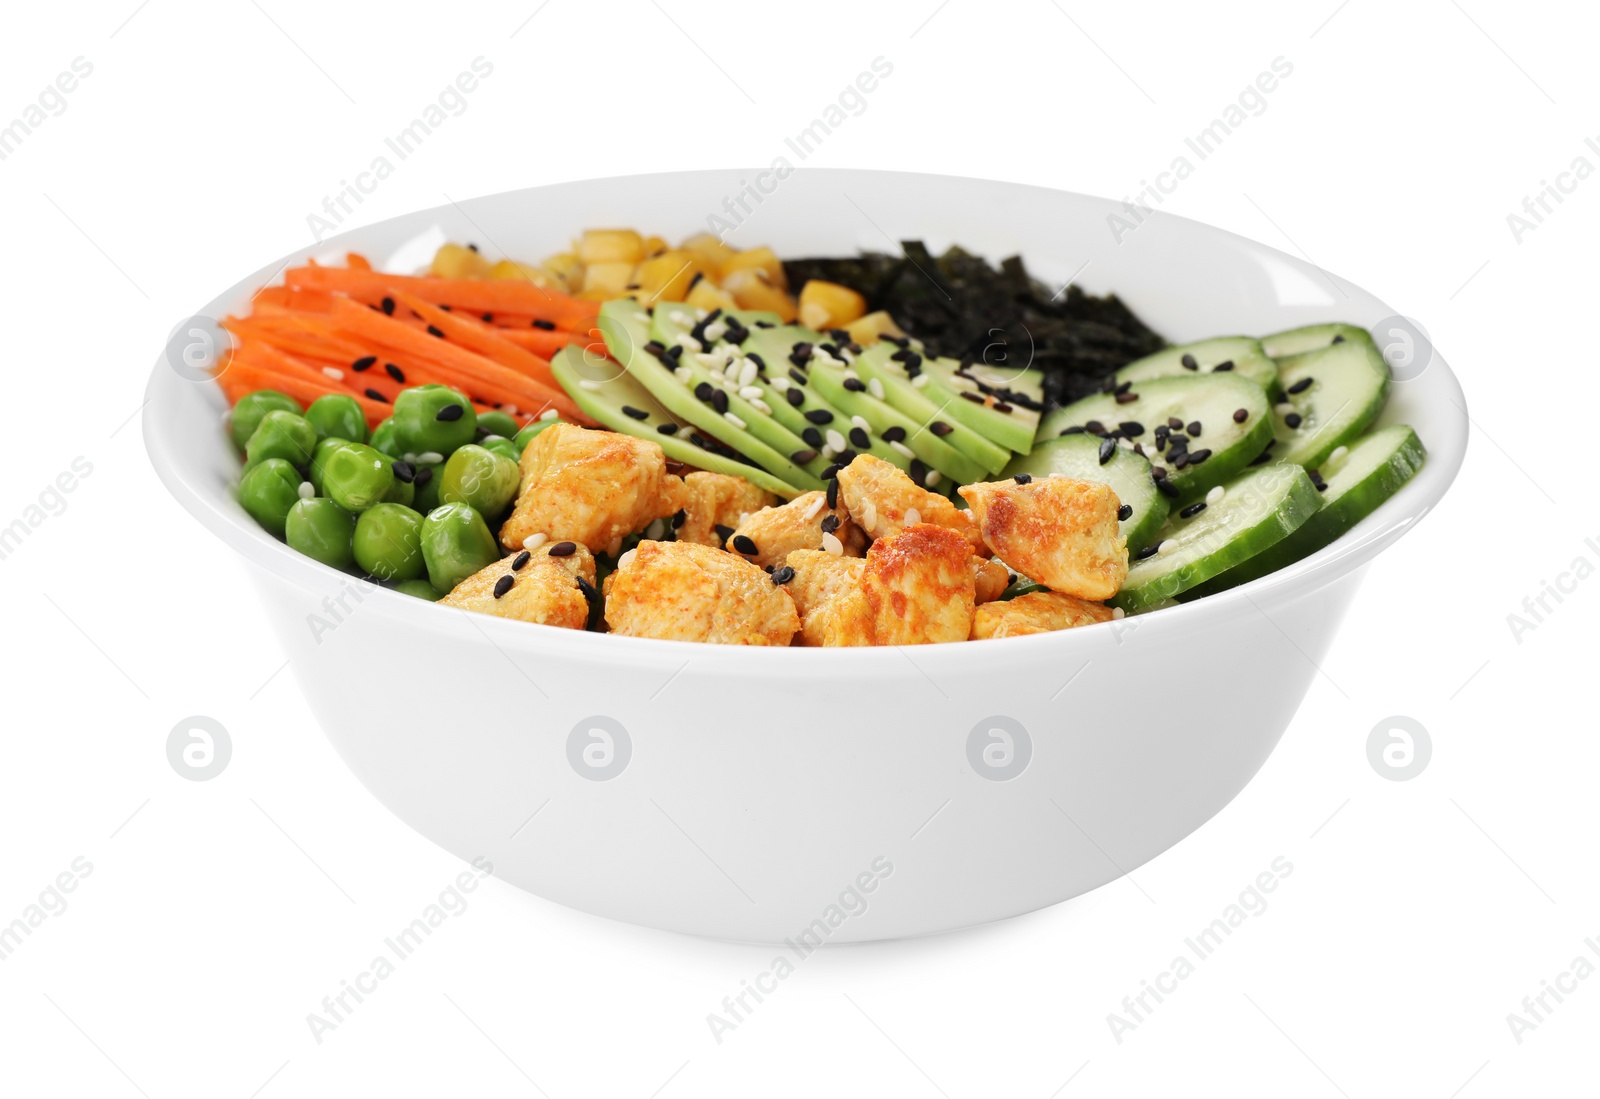 Photo of Delicious salad with chicken and vegetables in bowl isolated on white